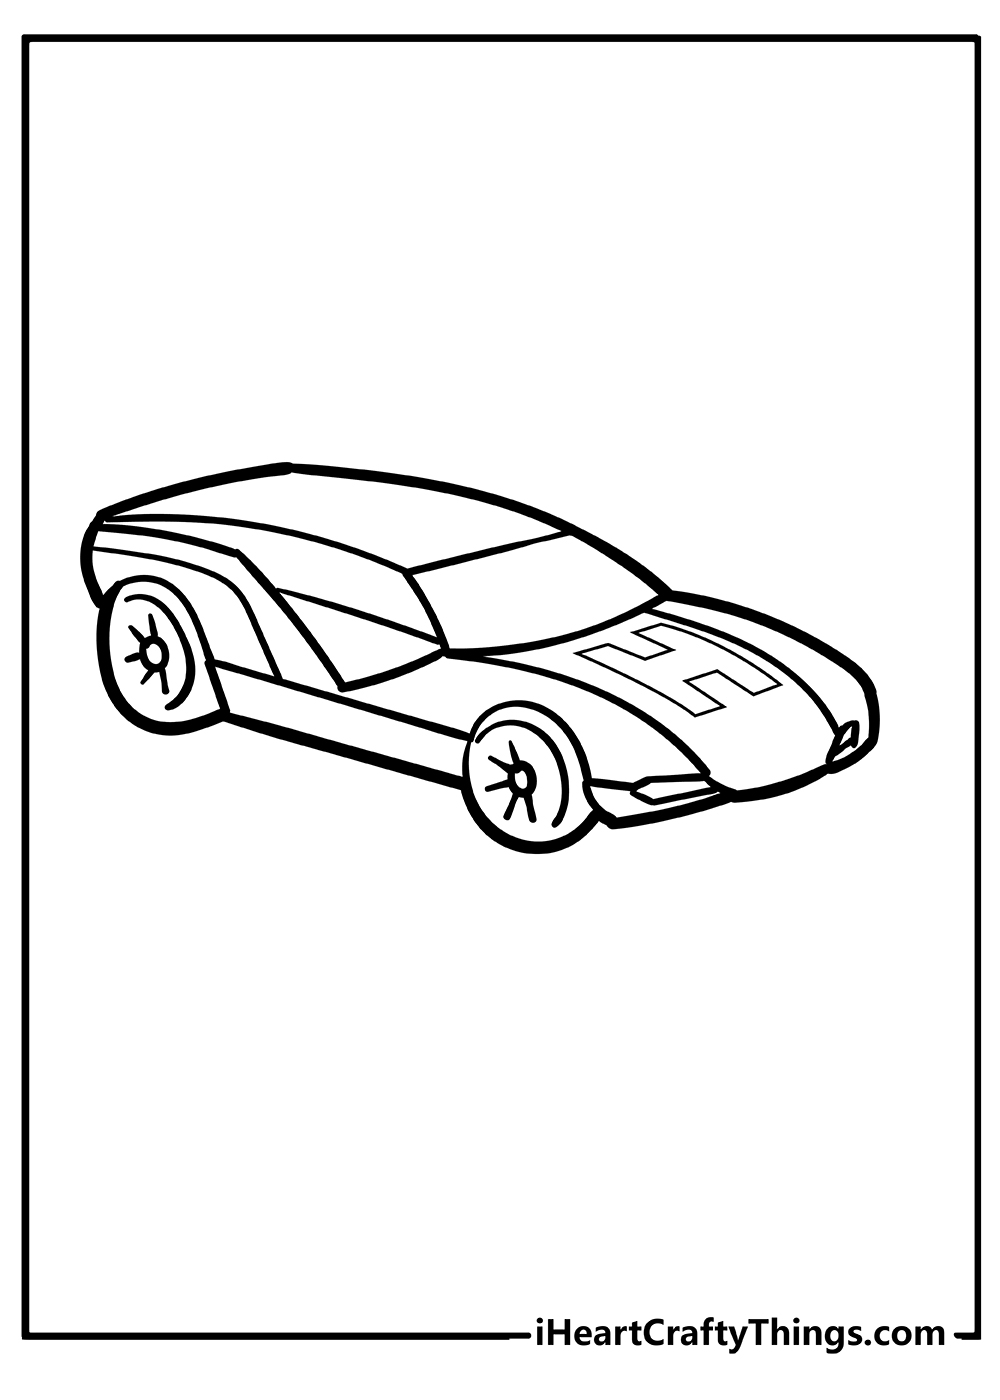 Hot Wheels Coloring Book for adults free download